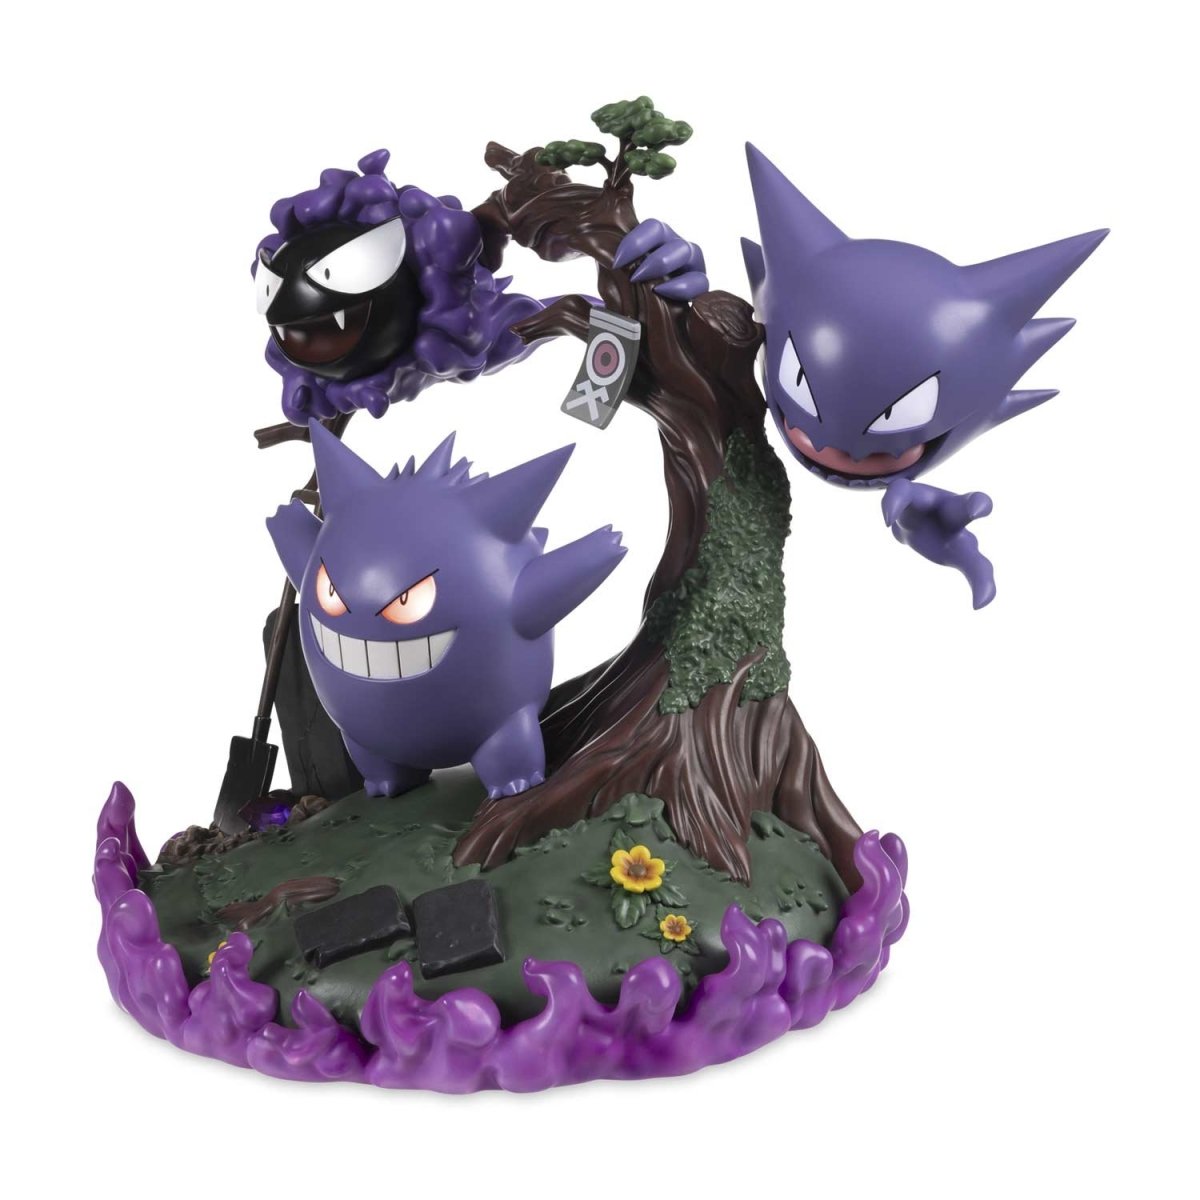 Looming Shadows Figure by First 4 Figures